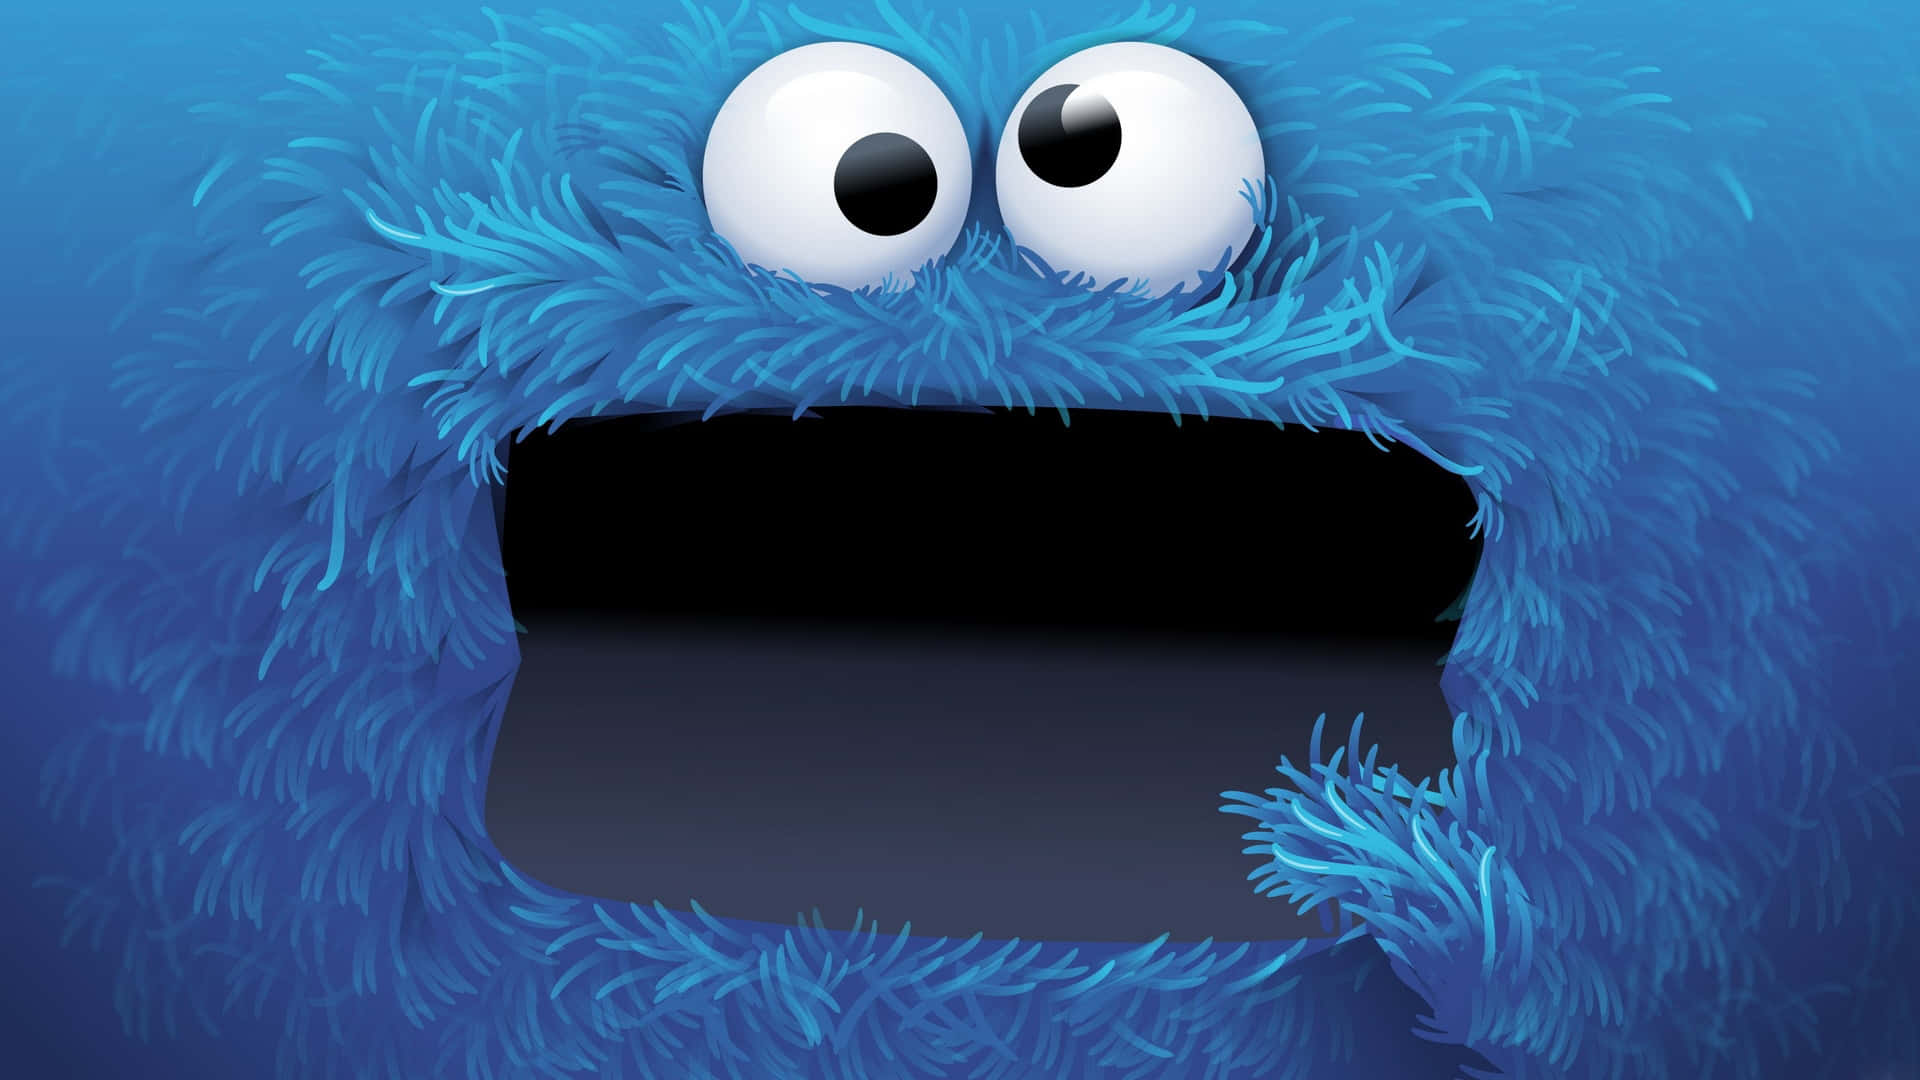 A Blue Monster With Eyes And A Mouth Wallpaper